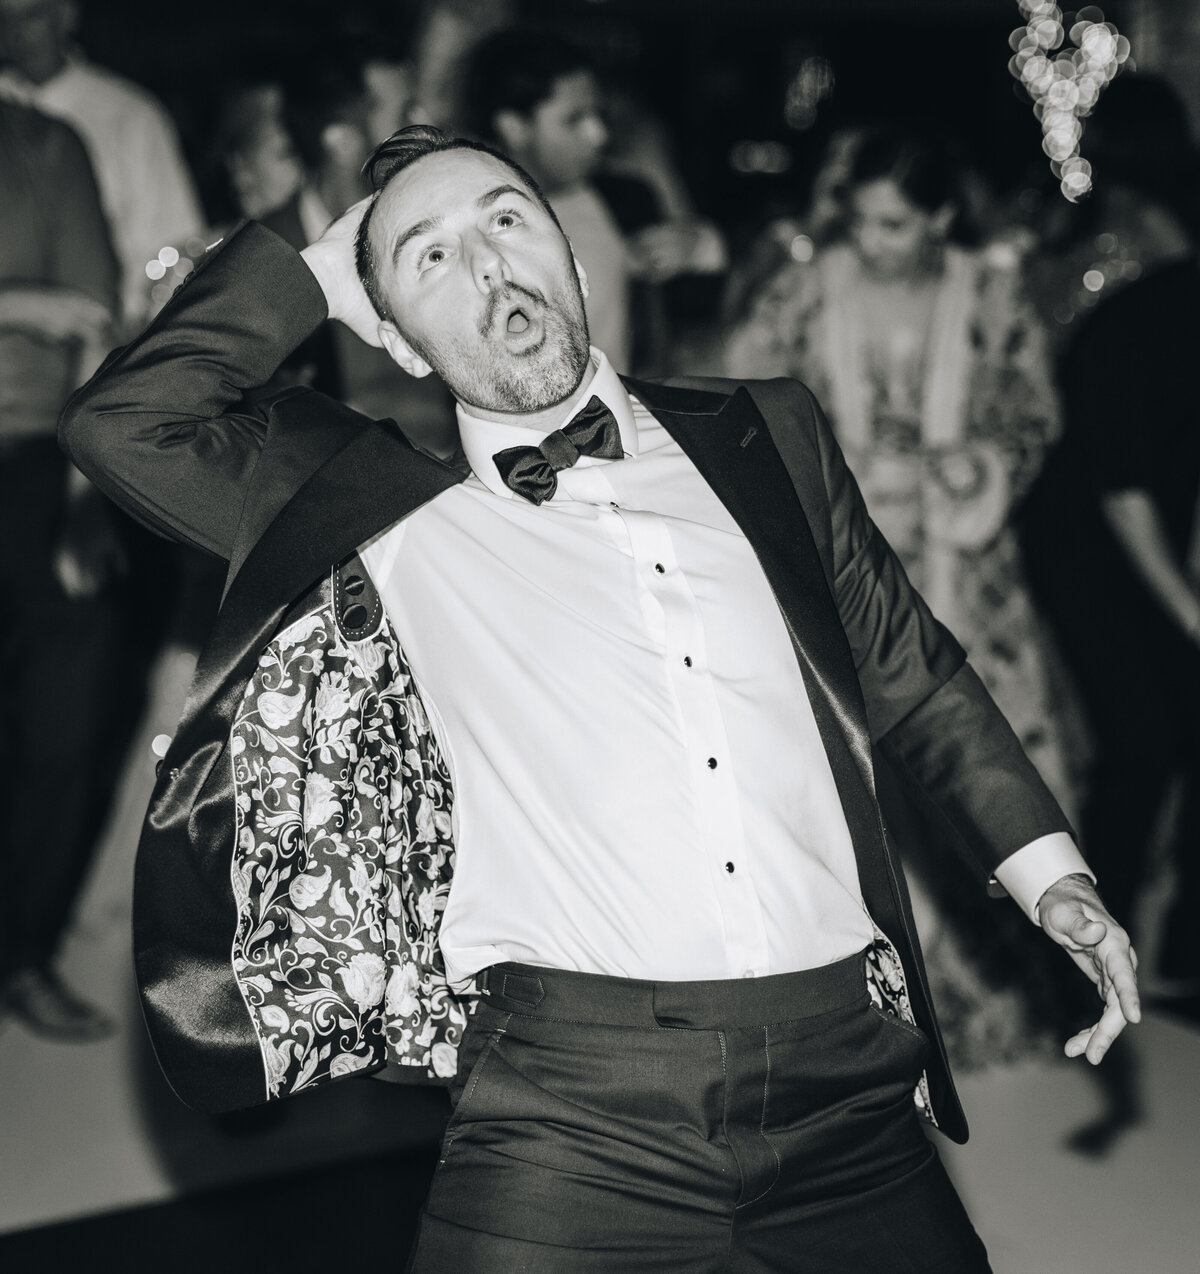 TONY + REKHA Ashville Wedding Day 2 - RECEPTION- after dinner party hThe Groom having the best time of his life